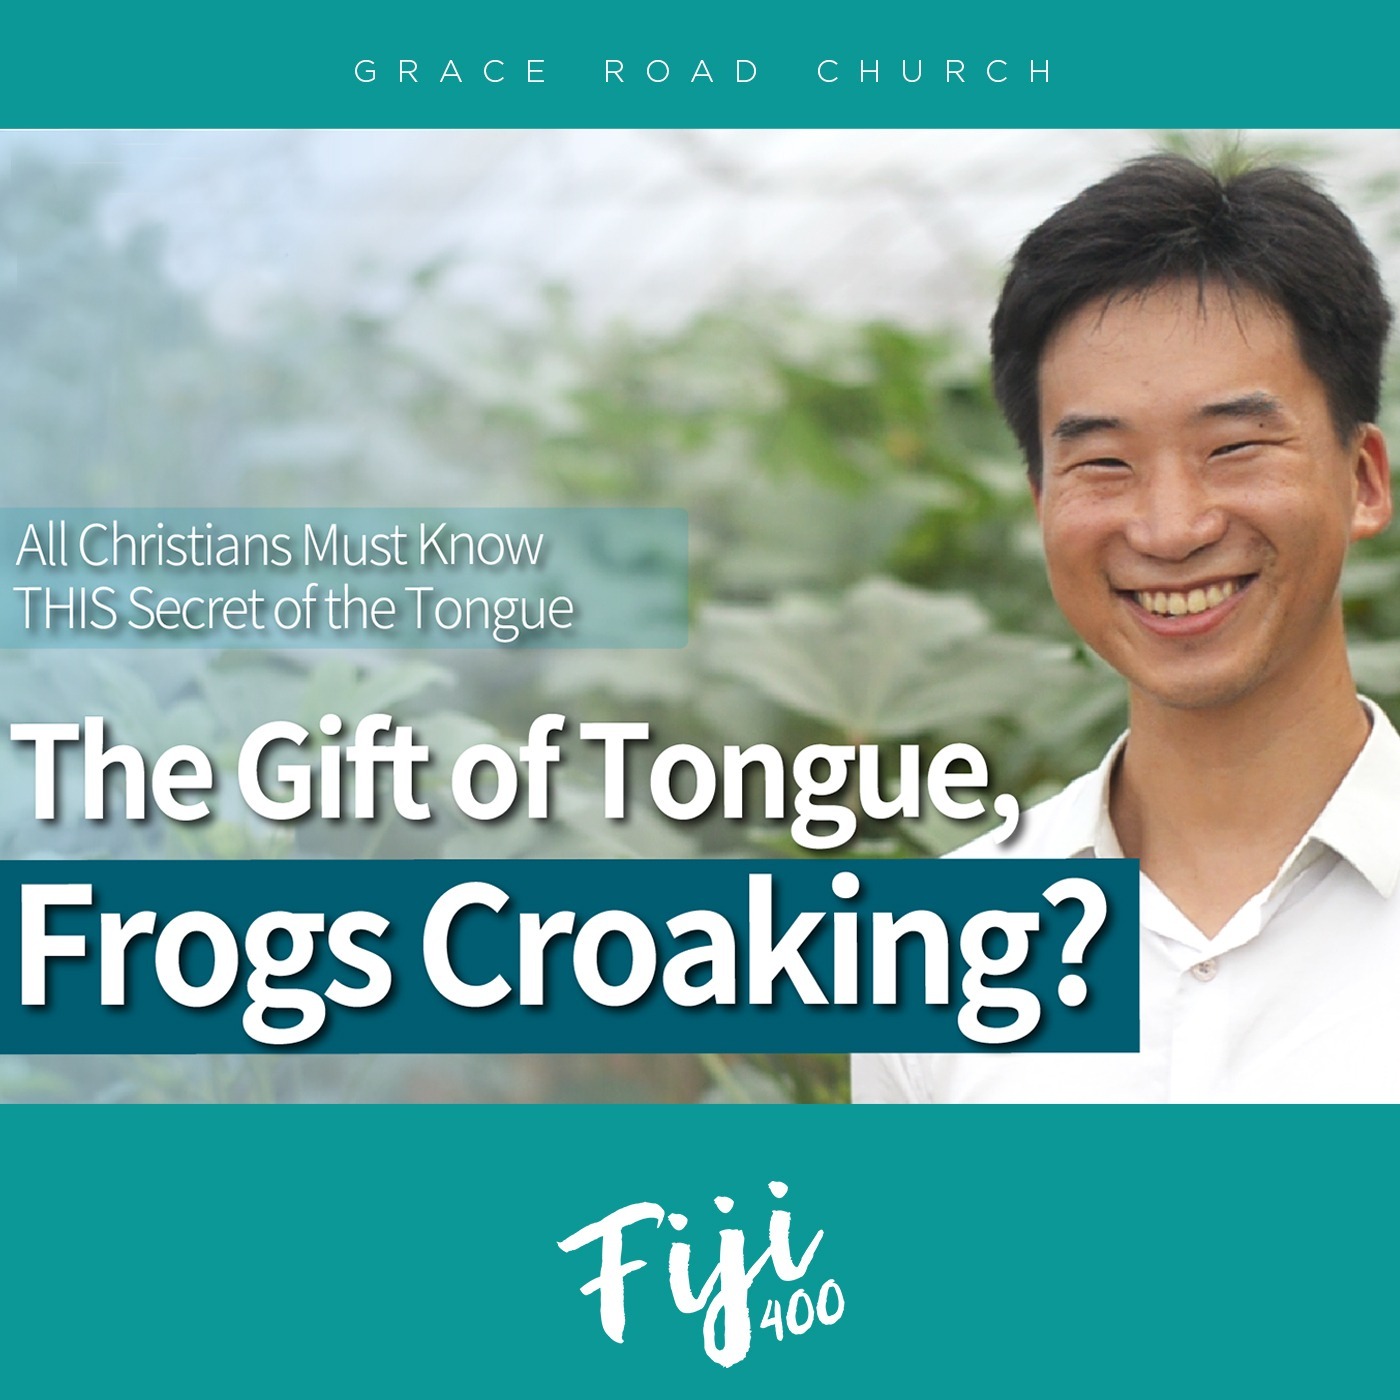 [Testimony] The Gift of Tongue, Frogs Croaking?